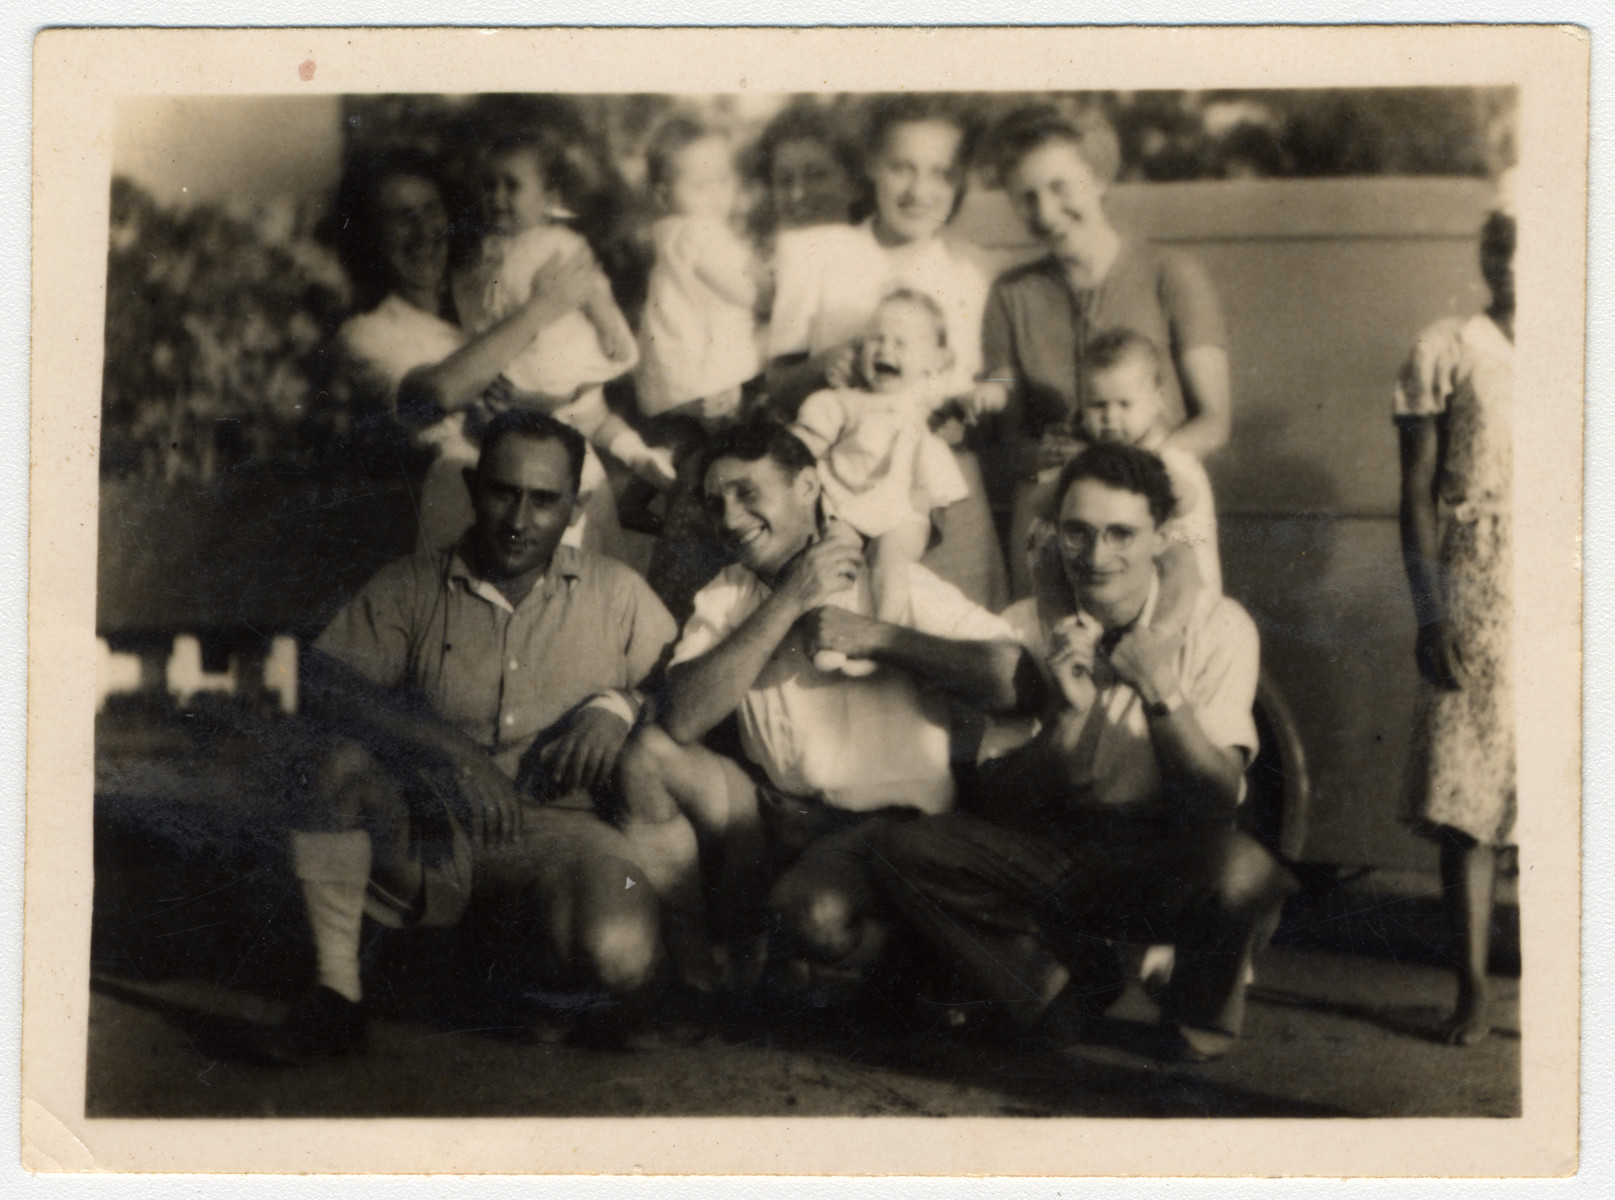 Group portrait of parents and infants in Nyasaland.

Lily Haber is in the top row on the right and Kalman Haber is in the bottom row in the middle.